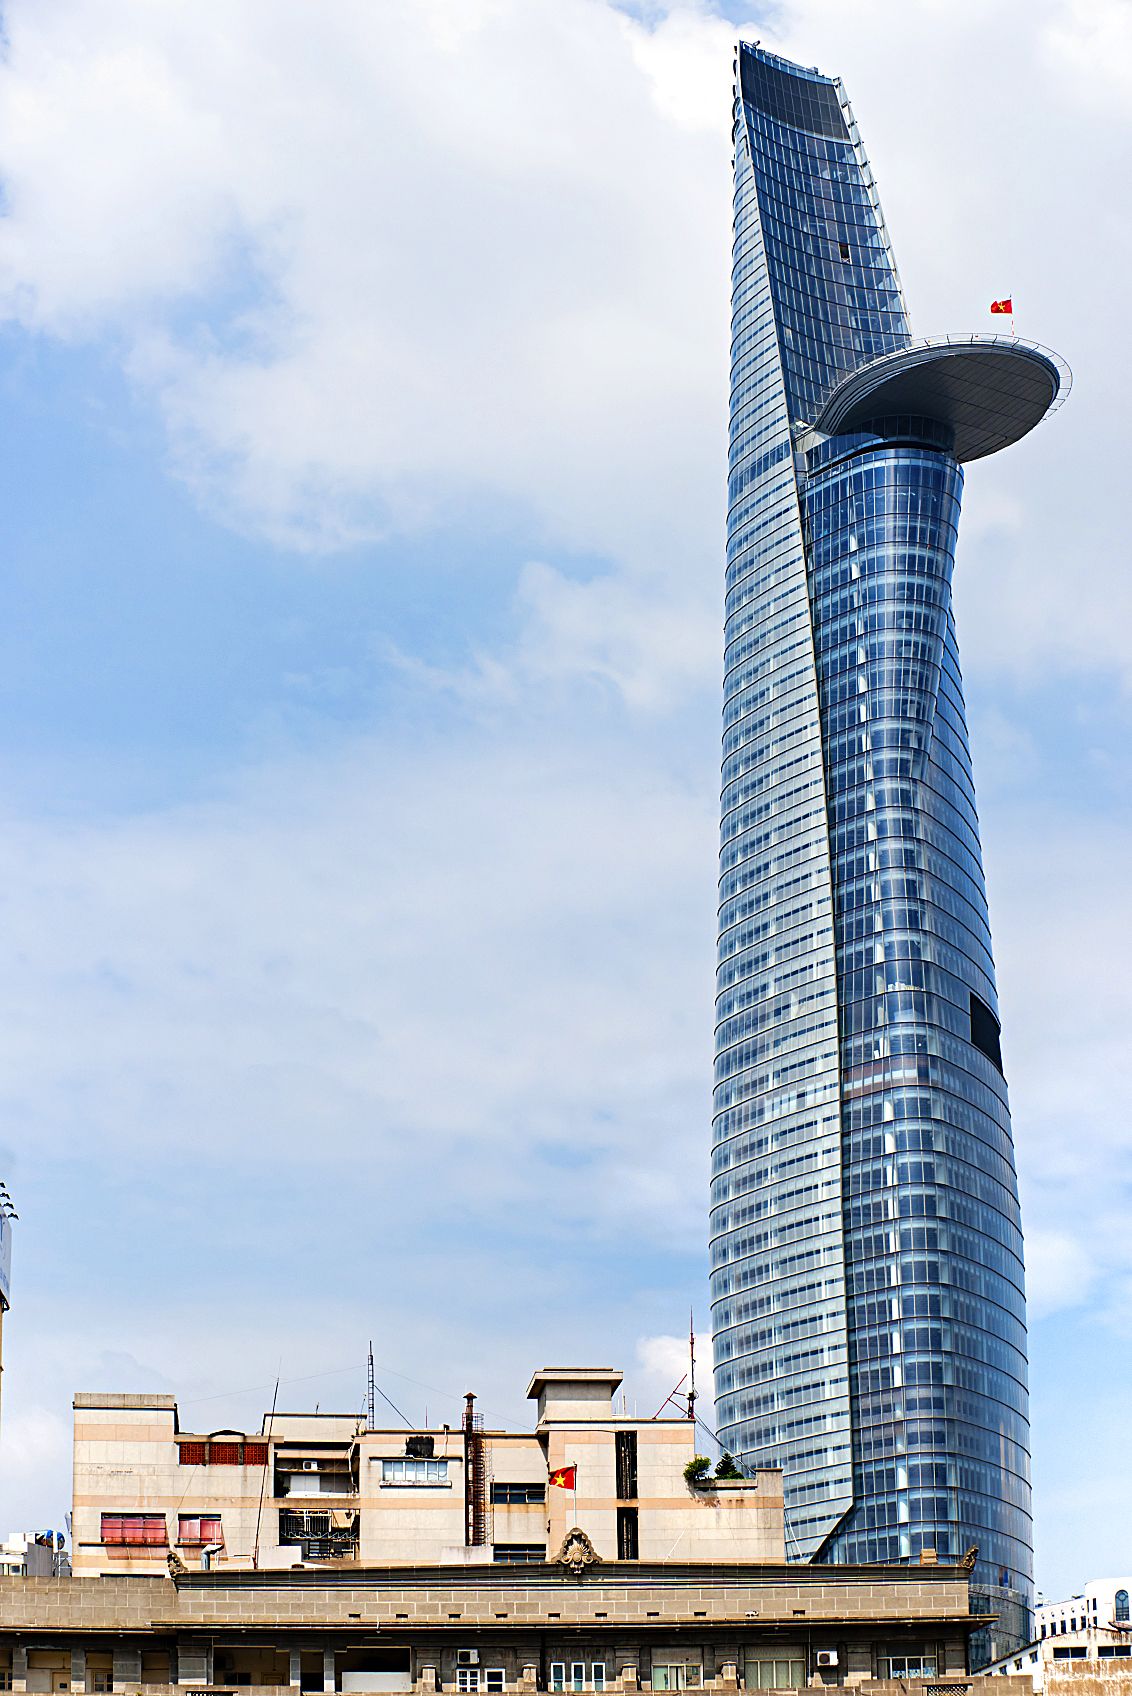 Amazing Skyscraper - Hug me! Champion Motors Tower is a 40 floor skyscraper  located in 'Six Day' street in Bnei Brak, Israel. The tower is 160 meters  (525 ft) and with its